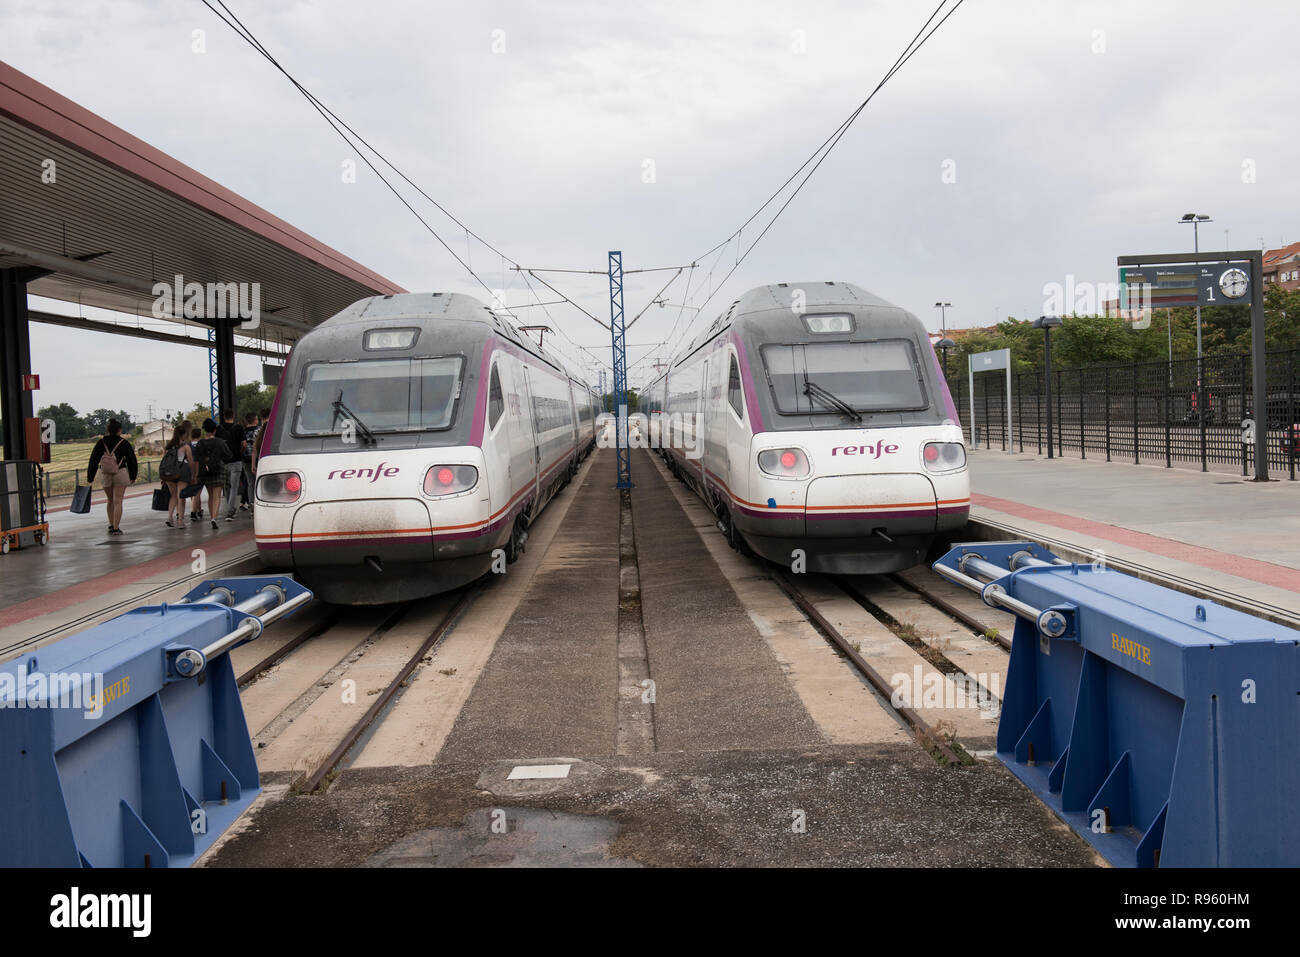 A local metro transportation is seen on this picture. Metro railway is one of the most popular forms of transportation in Spain. The railway tracks ar Stock Photo